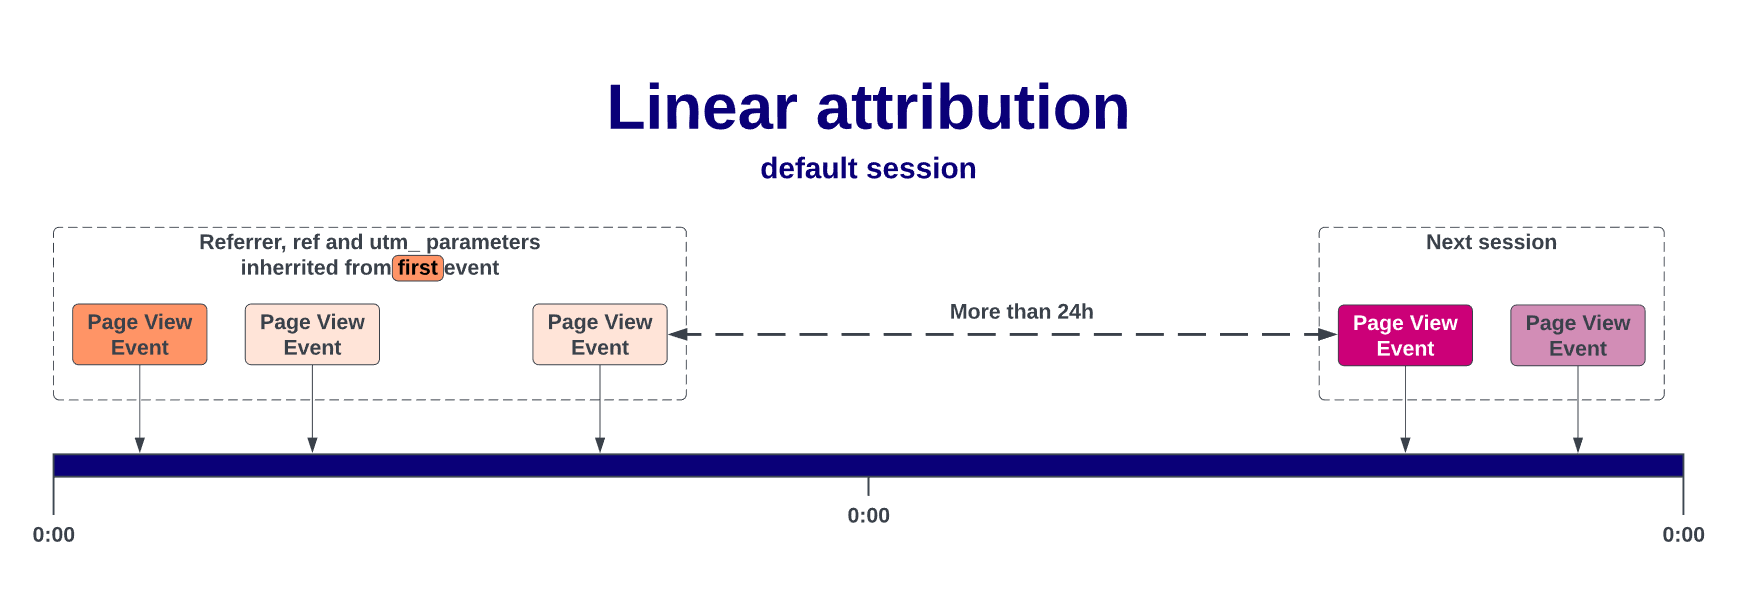 Tracking Linear Attribution from first click in session